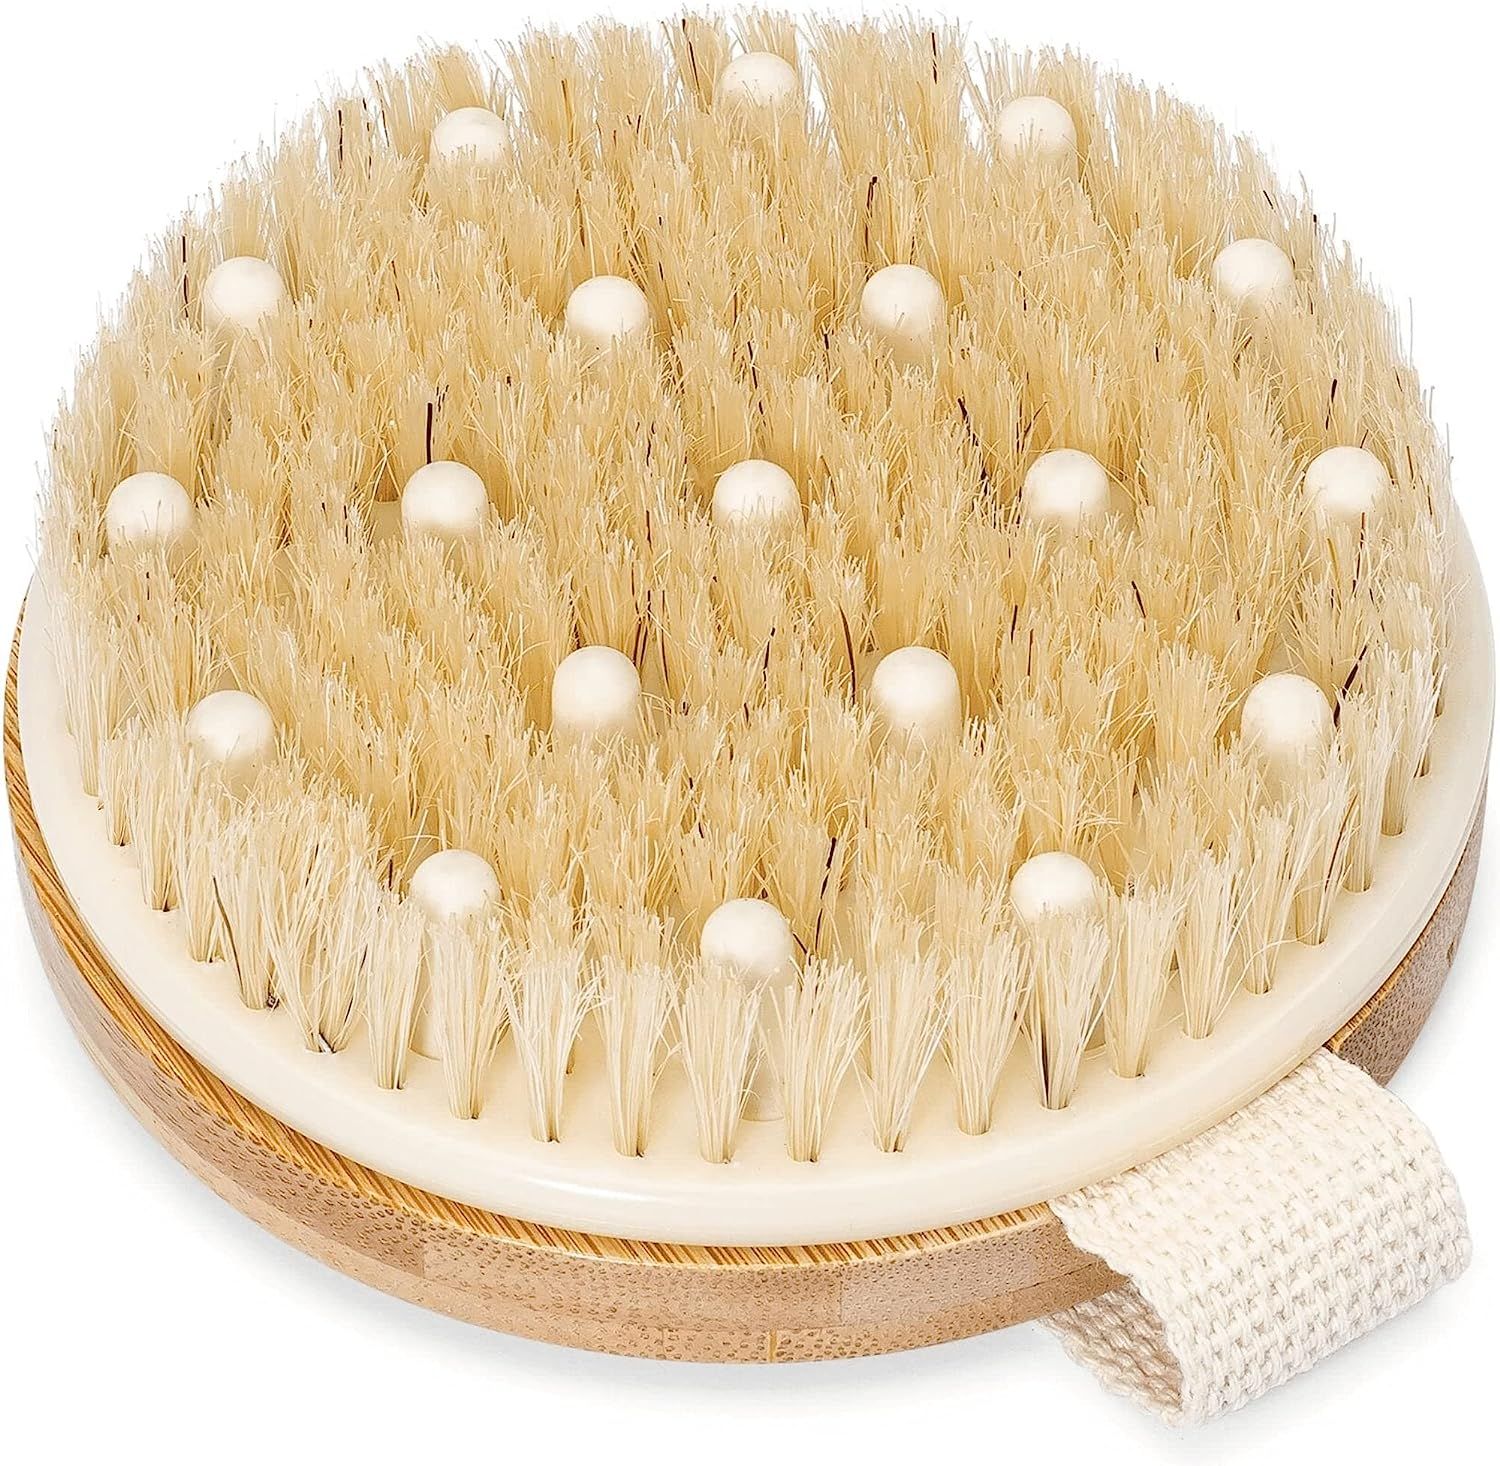 Dry Brushing Body Brush - Best for Exfoliating Dry Skin, Lymphatic Drainage and Cellulite Treatme... | Amazon (US)